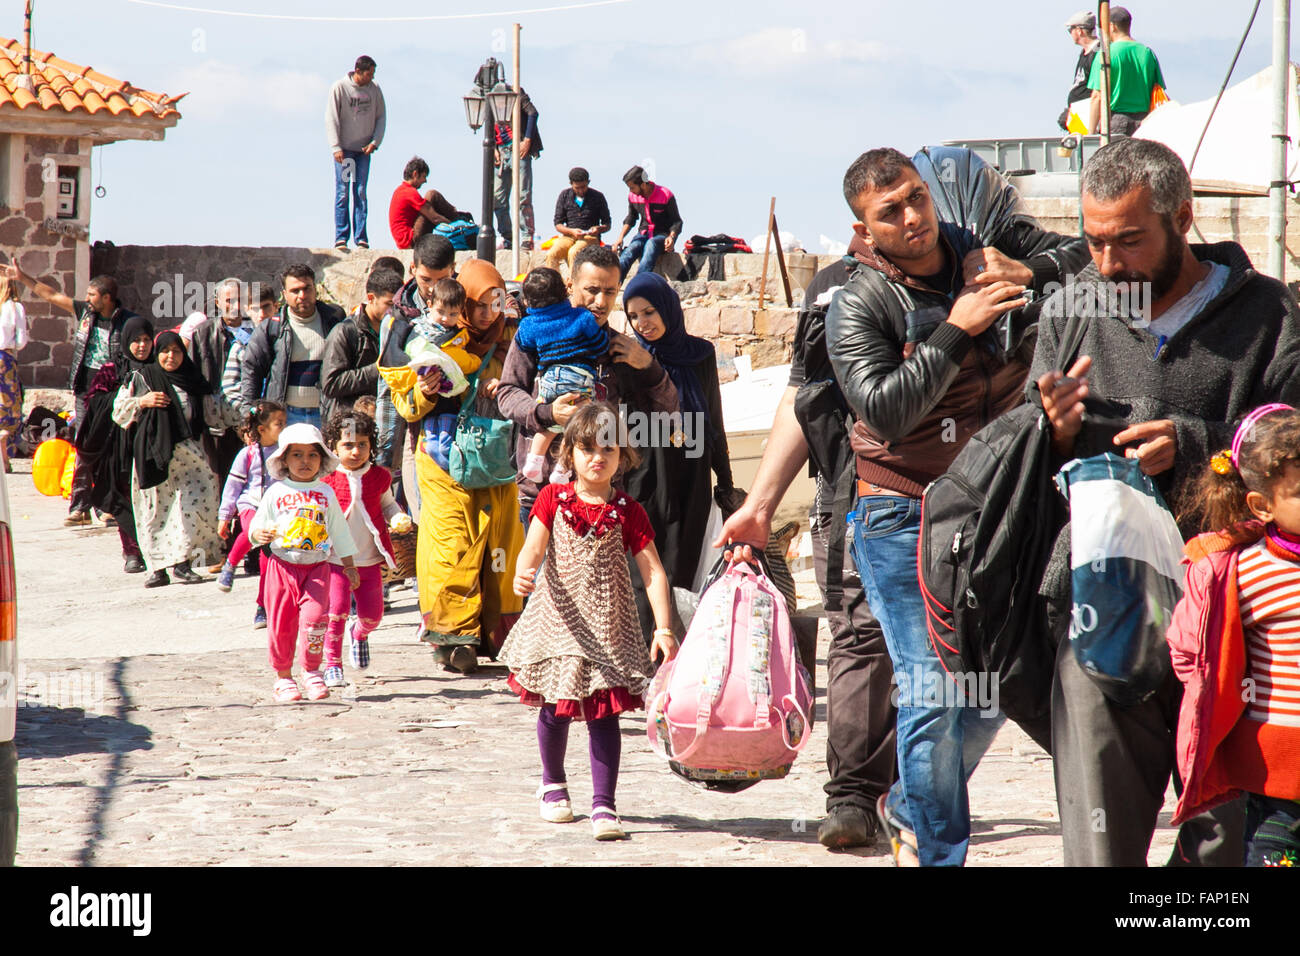 Syrian refugees and immigrant  families having just arrived in  the town of Molyvos on the island of Lesbos Greece by inflatable boats Stock Photo